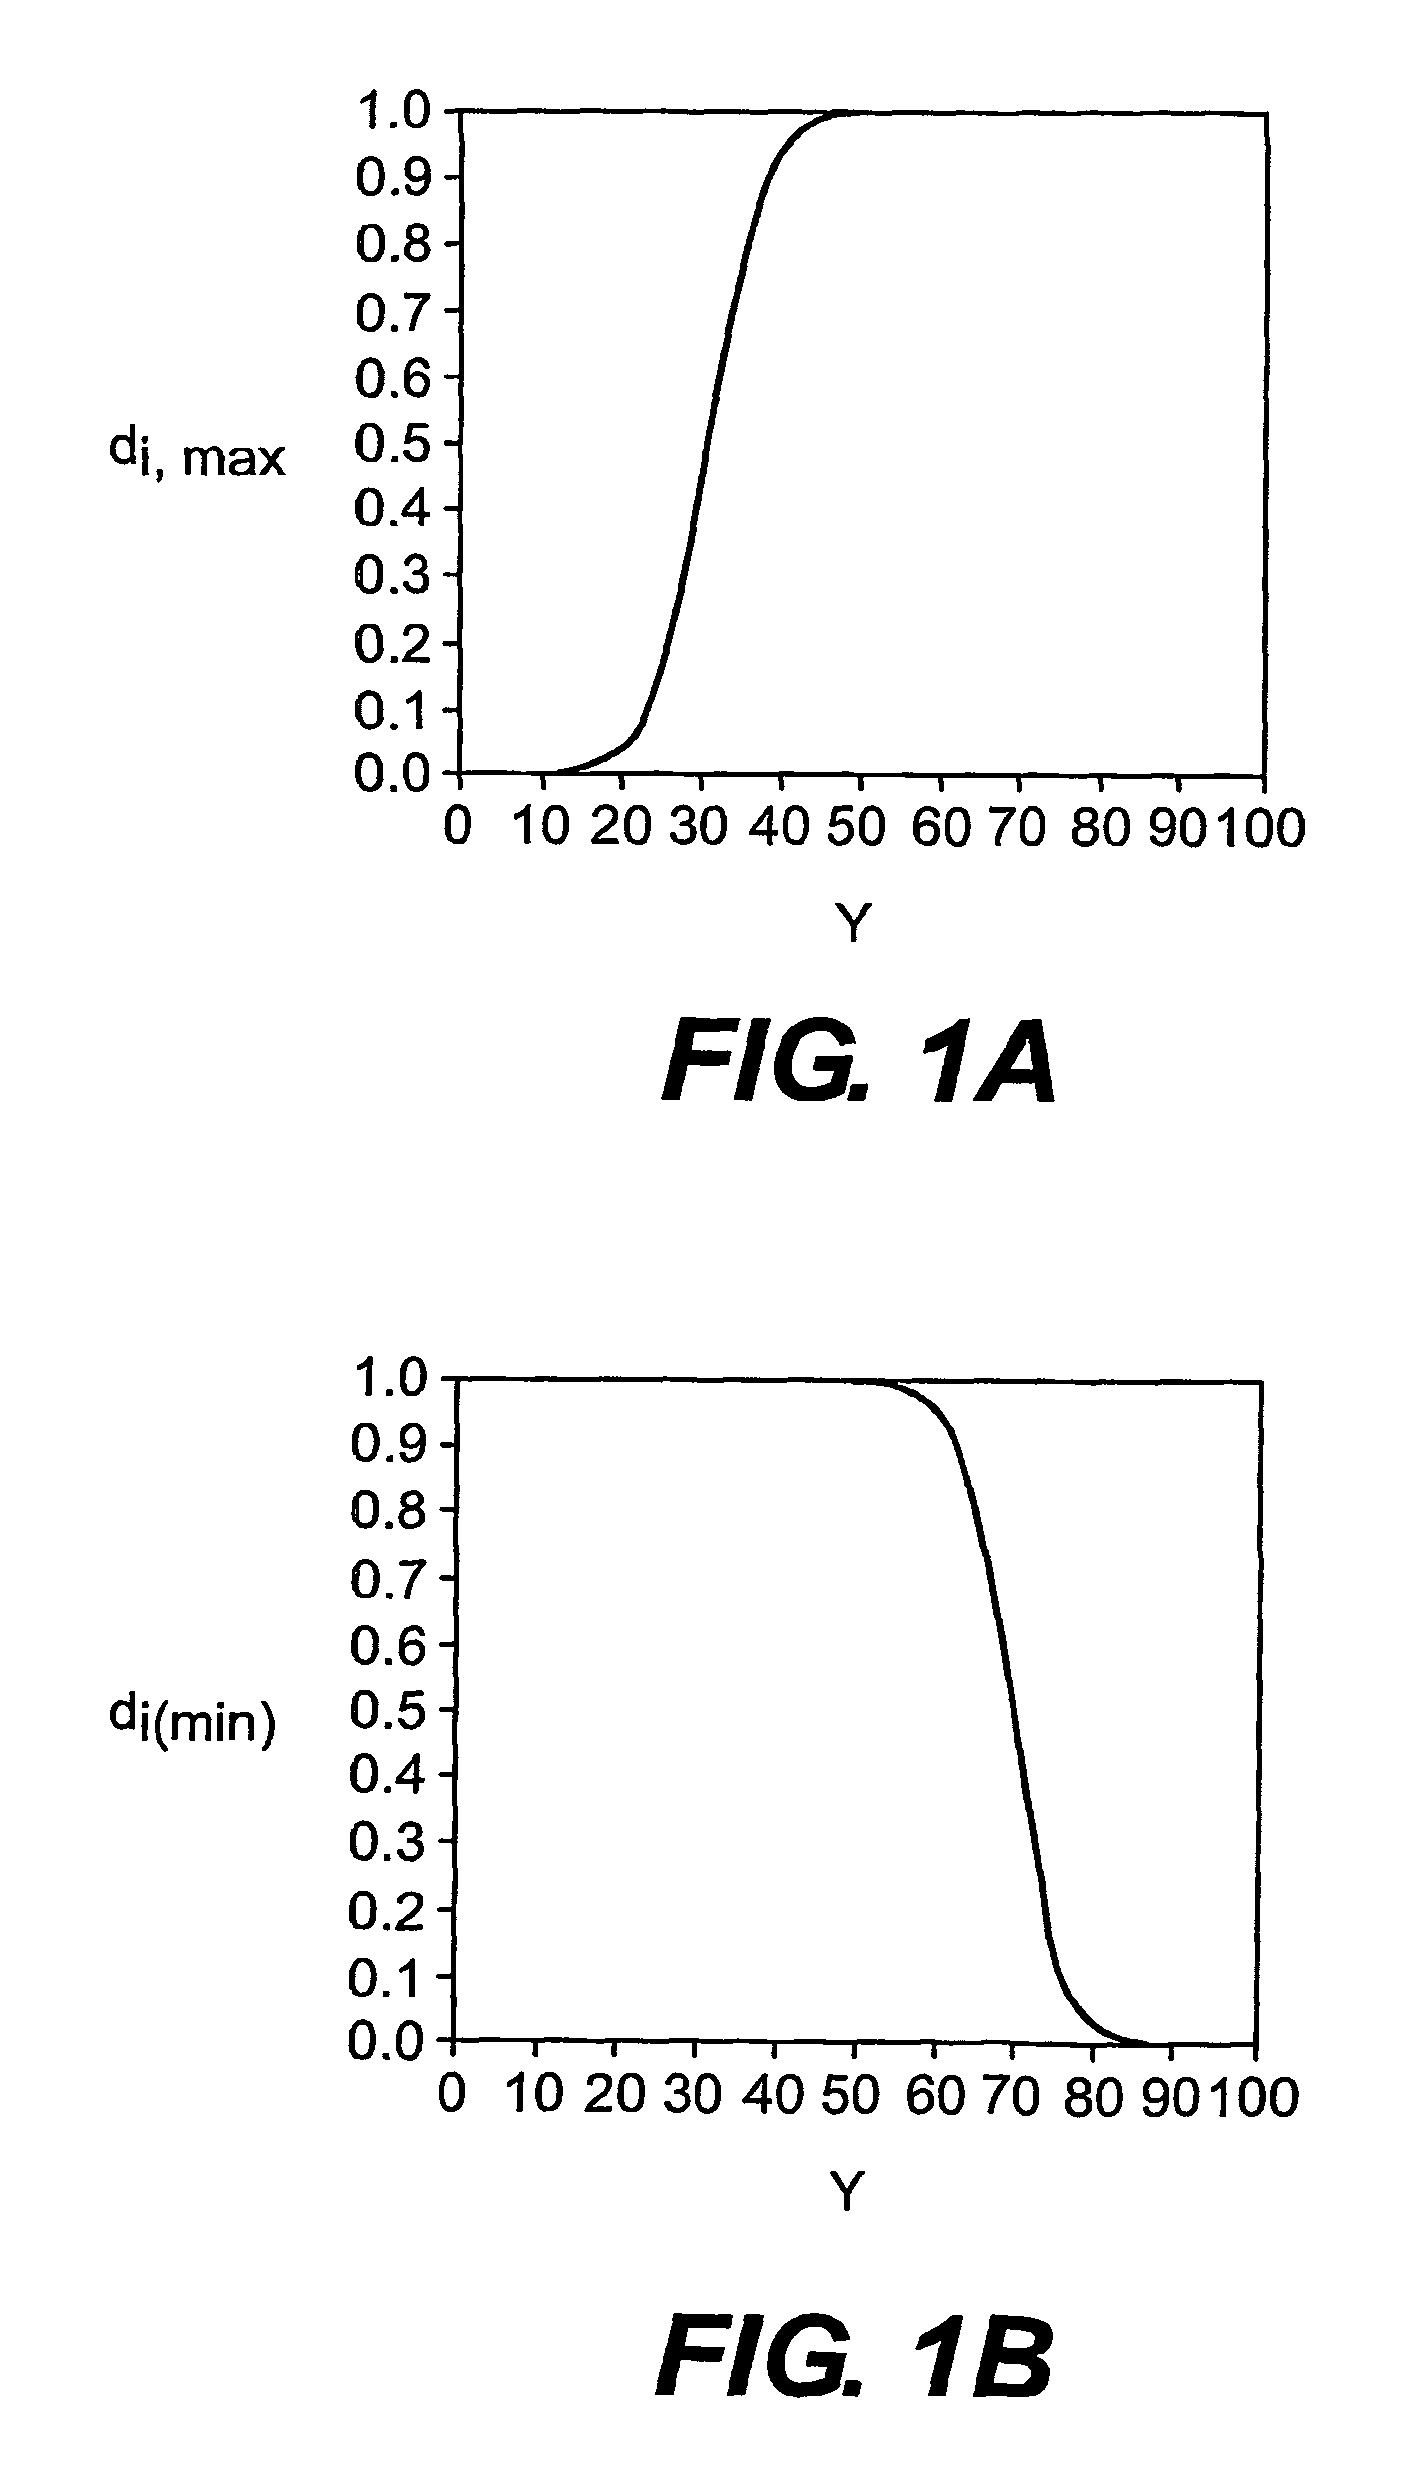 Multi-drug titration and evaluation